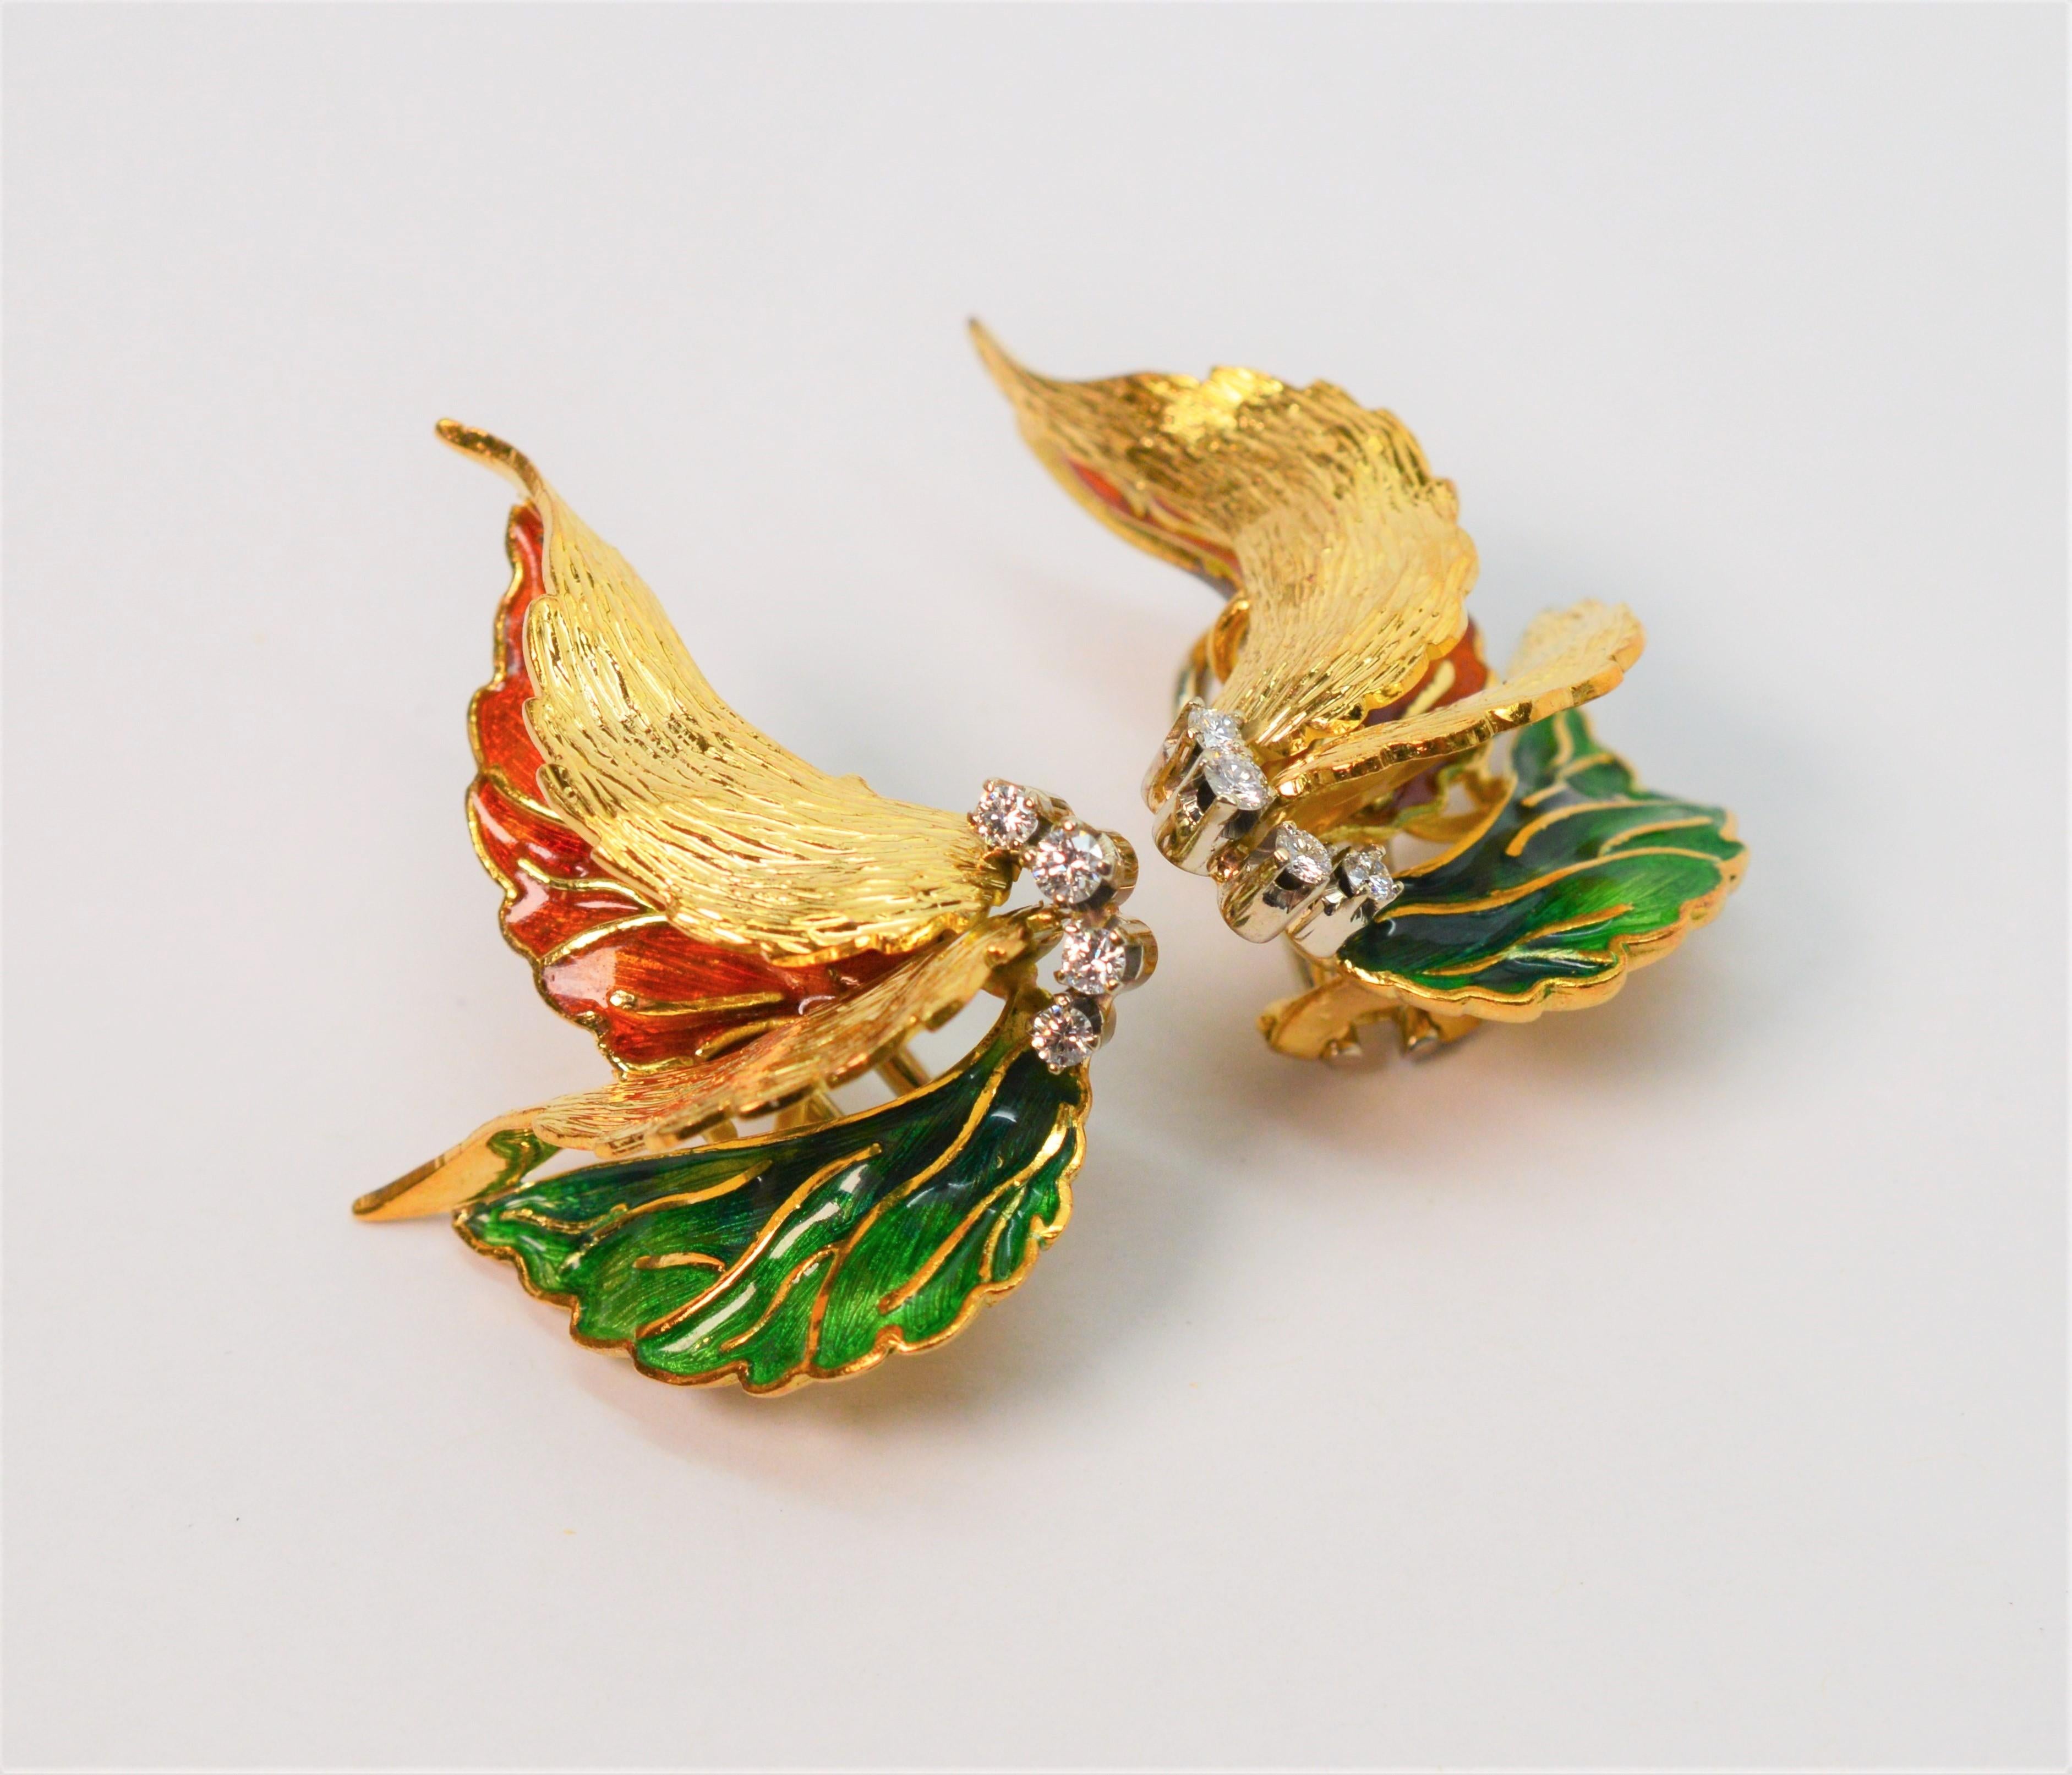 Hand painted Sienna and fern green enamel leaves of sculpted eighteen karat 18K yellow gold create the unique form of these artful vintage earrings. 
Each is accented with four bright .04 carat H/VS fine round faceted diamonds, .32 carats total